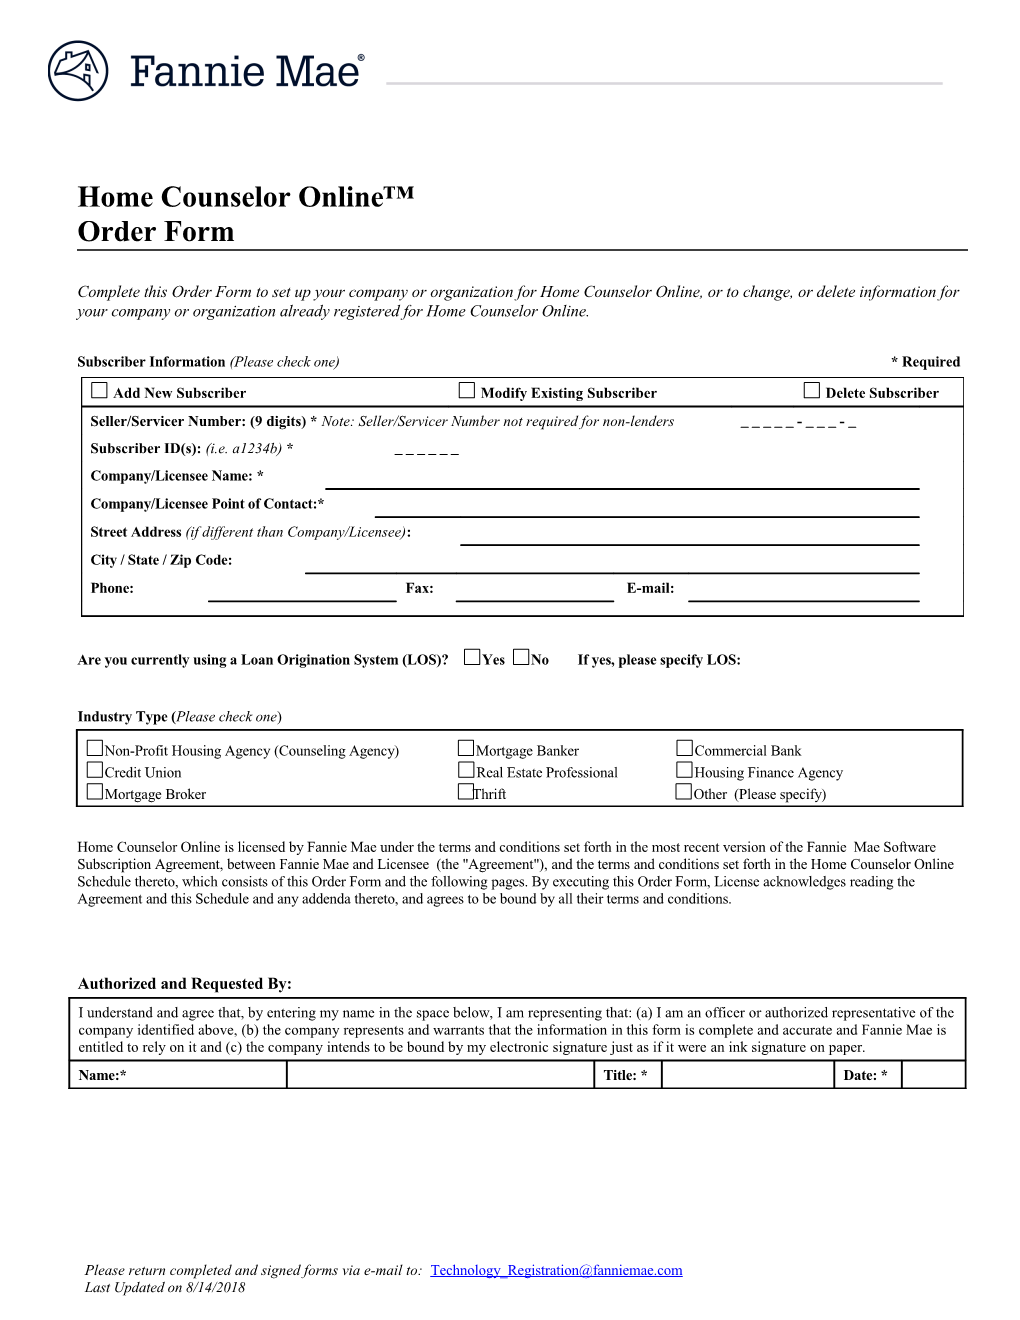 Home Counselor Online Order Form/Schedule